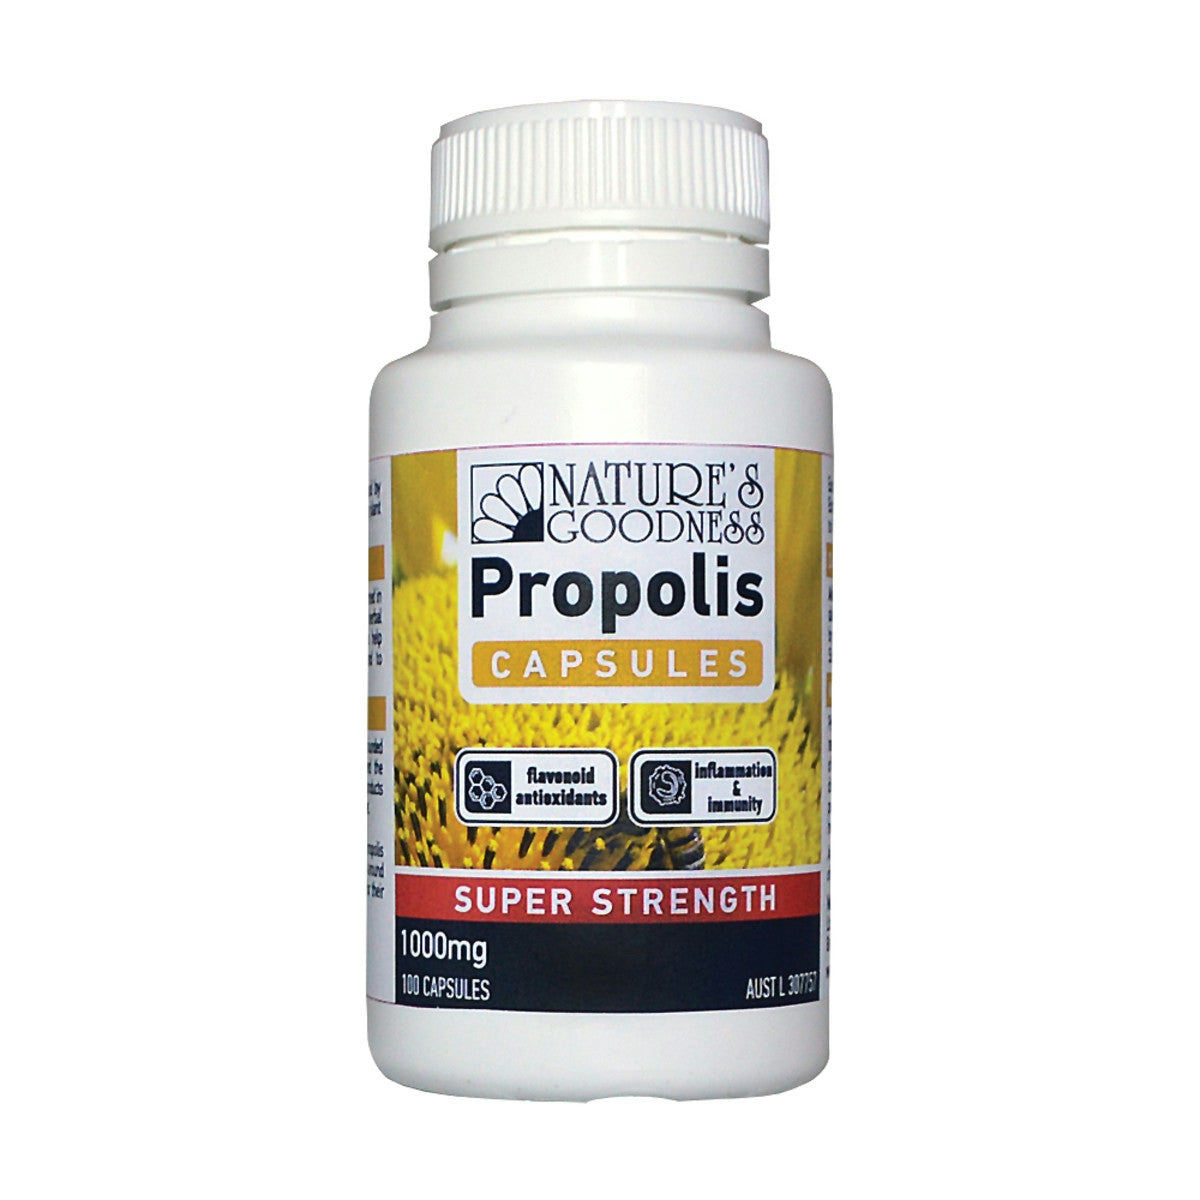 image of Nature's Goodness Propolis Capsules Super Strength 1000mg 100c on white background